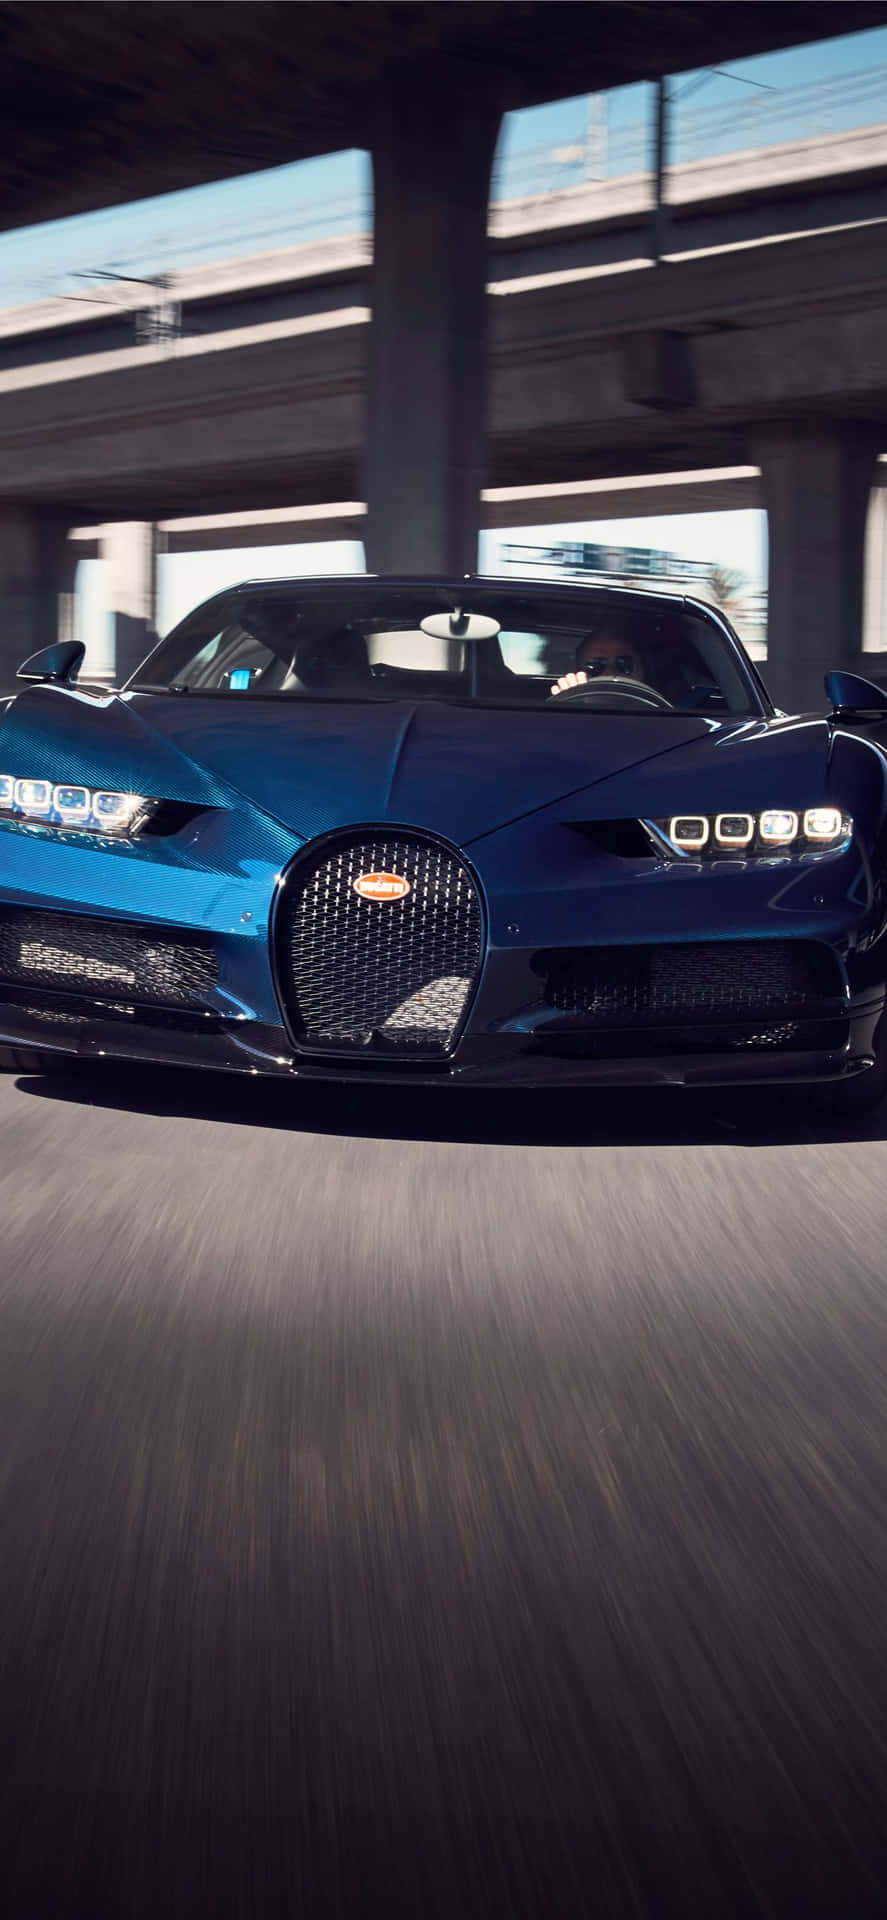 Get the speed and performance of a Bugatti on your phone. Wallpaper